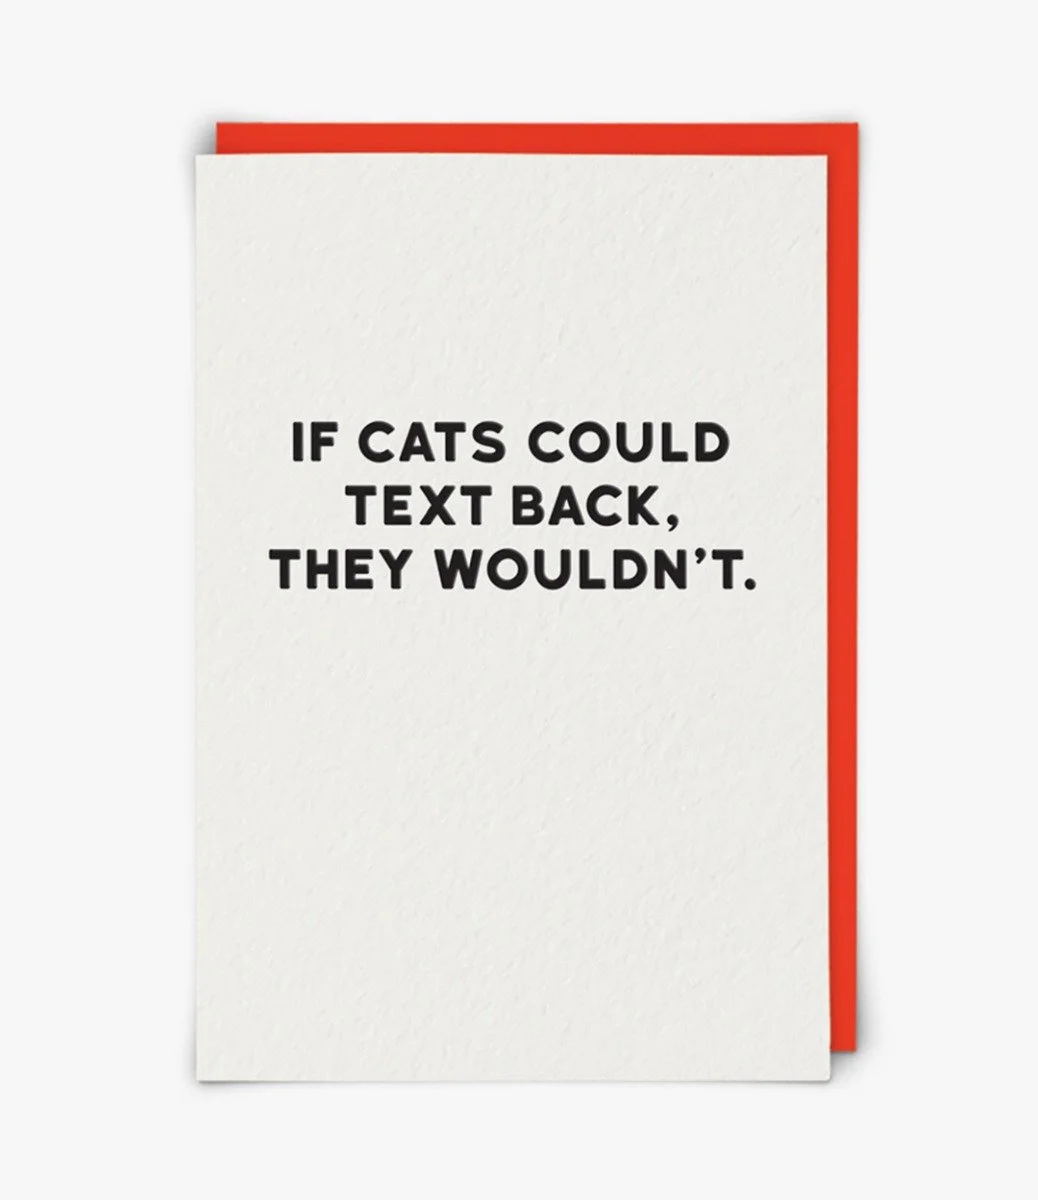 "Cats" Contemporary Greeting Card by Redback